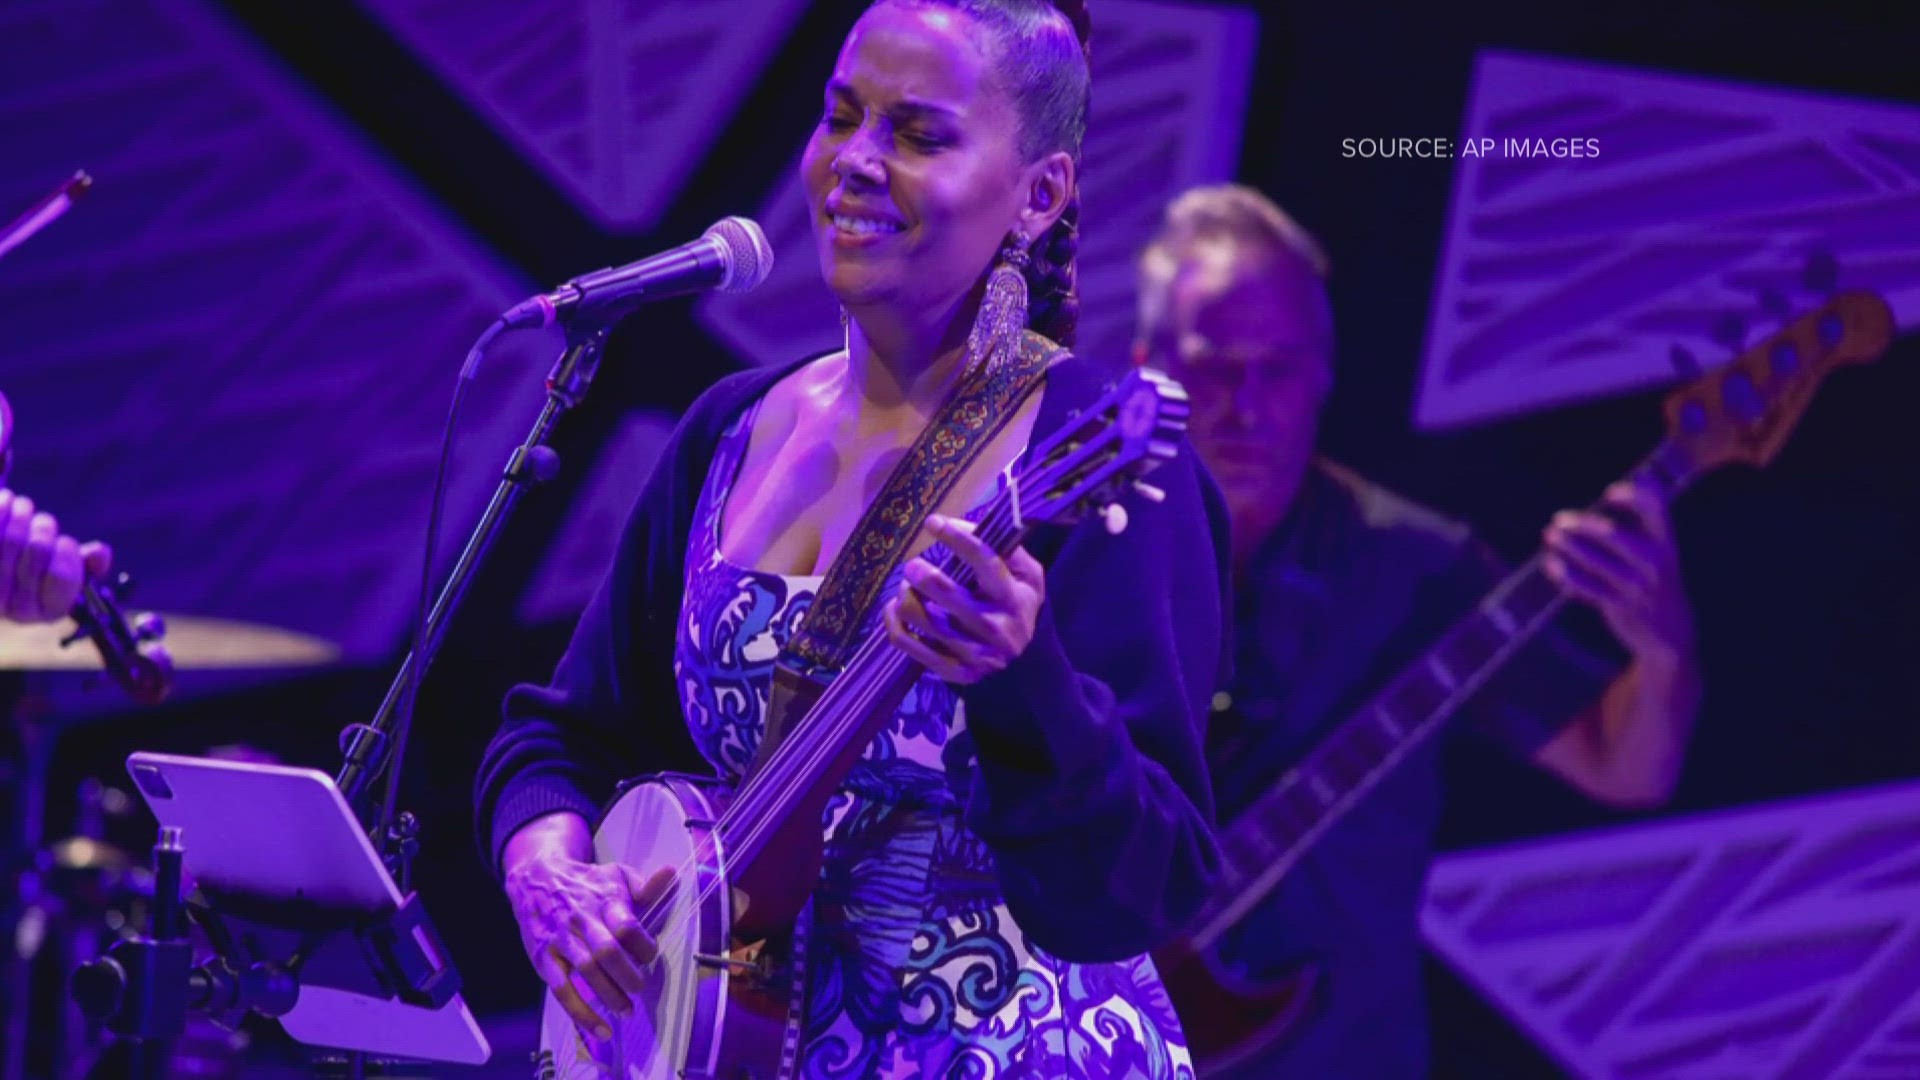 Grammy-winning artist and Greensboro, NC native Rhiannon Giddens plays the banjo in Beyonce's new single 'Texas Hold 'Em.'